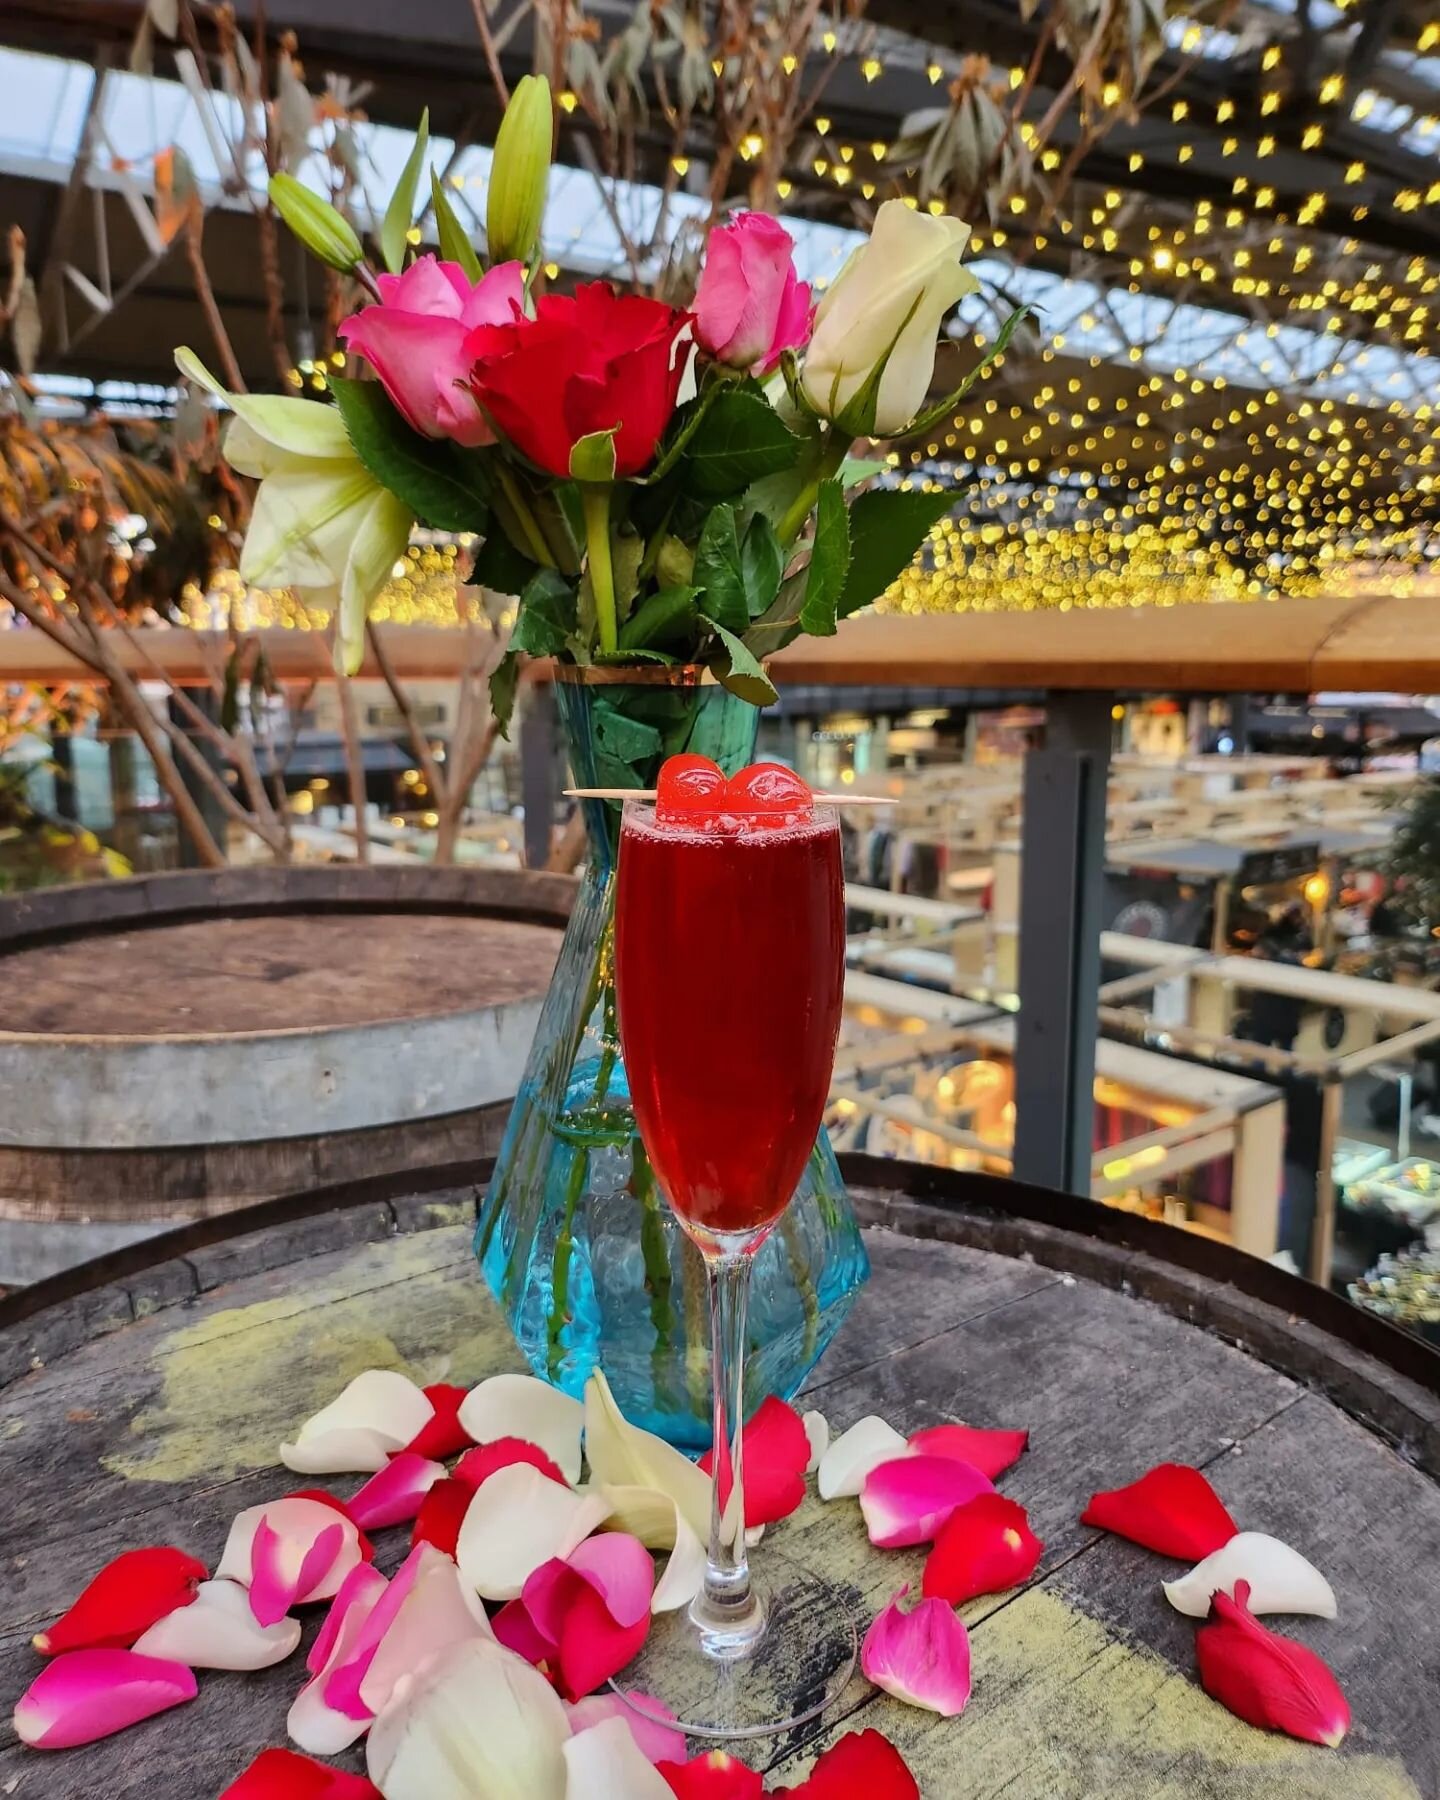 Celebrate the season of love with us this Valentine's Day ♡ Our stunning Valentine's cocktails is the perfect taste of romance!

❣️The Love Potion

The perfect place for a romantic date night up in the twinkling lights above @oldspitalfieldsmarket - 